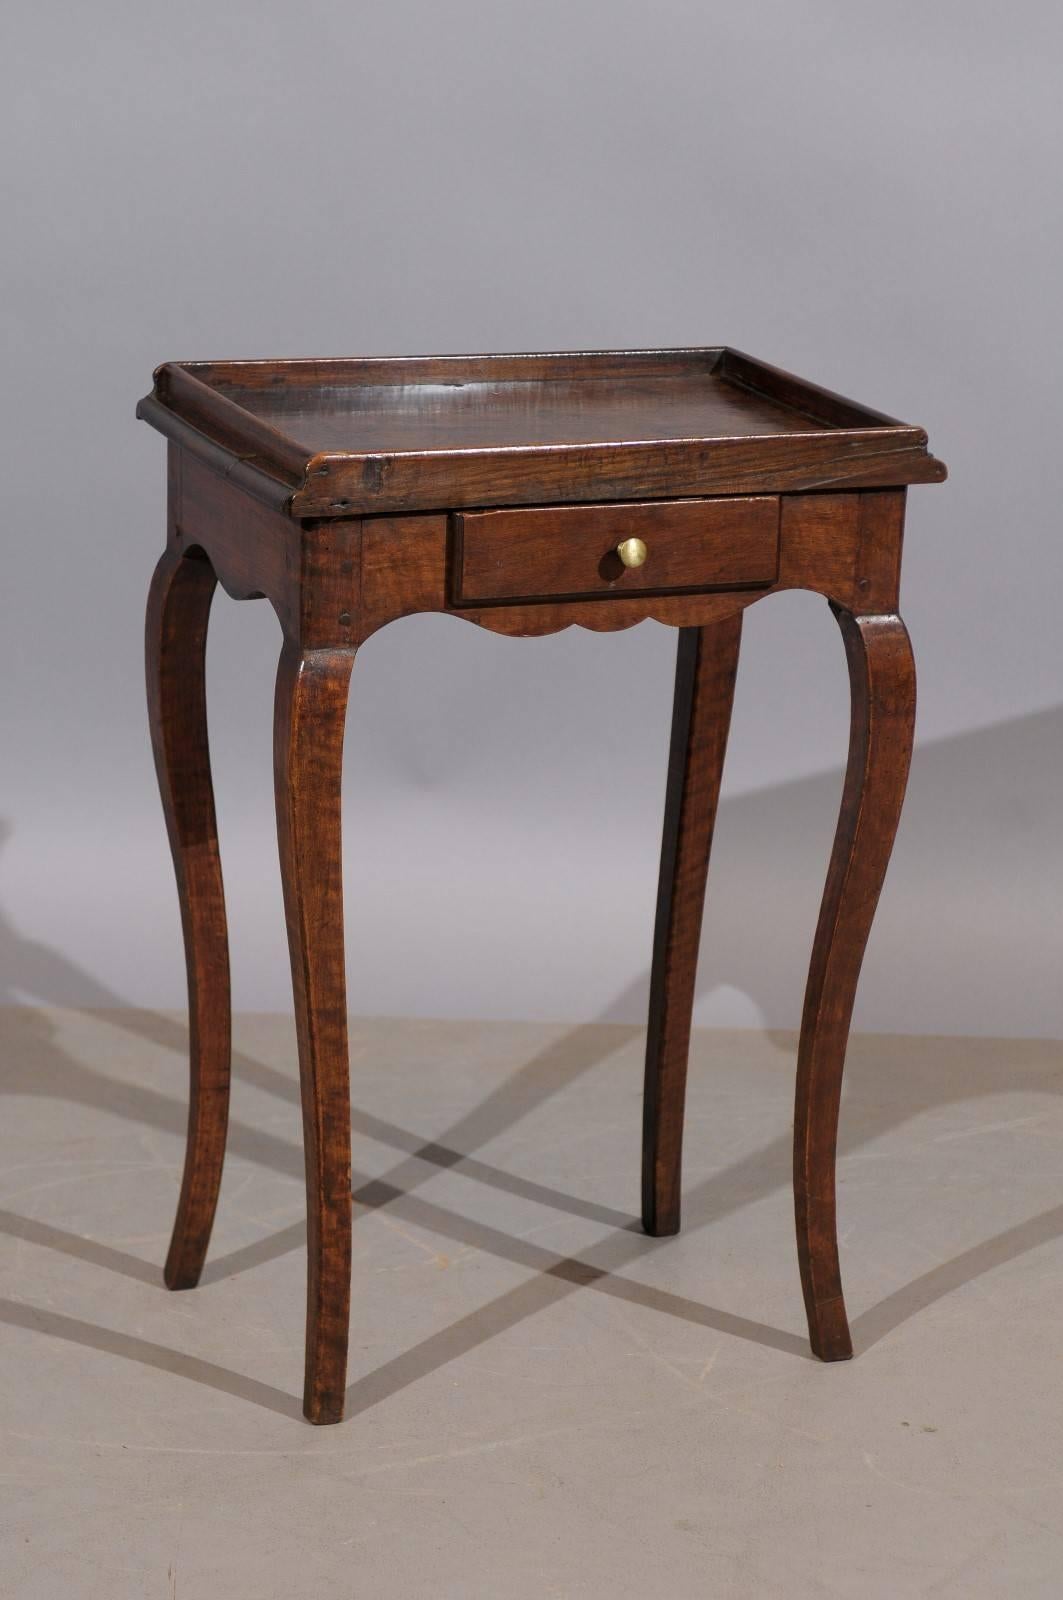 Small 18th century, French, Louis XV walnut table with tray top and drawer.